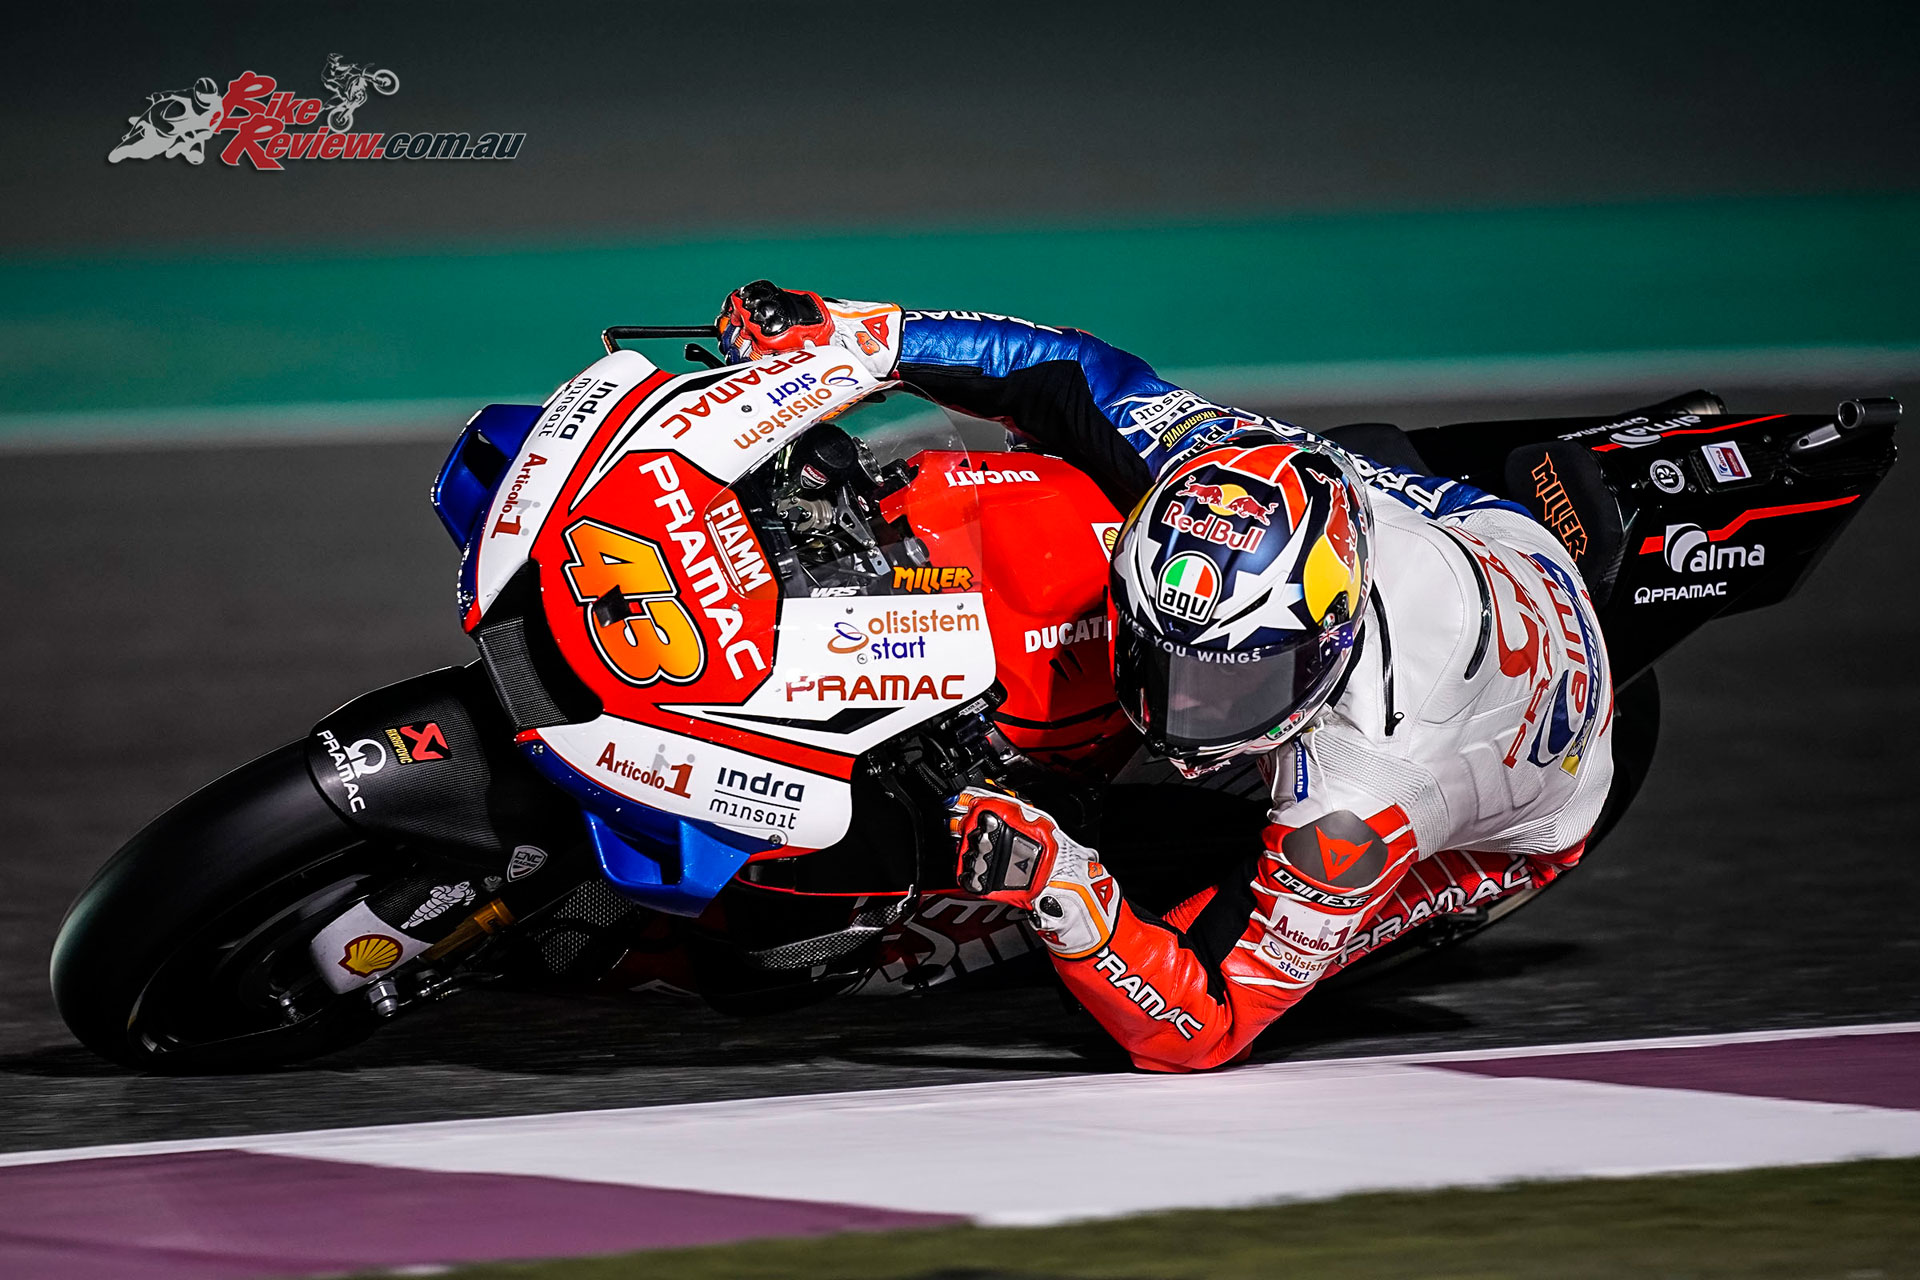 Andrea Dovizioso claims Qatar victory - Jack Miller DNF - Bike Review